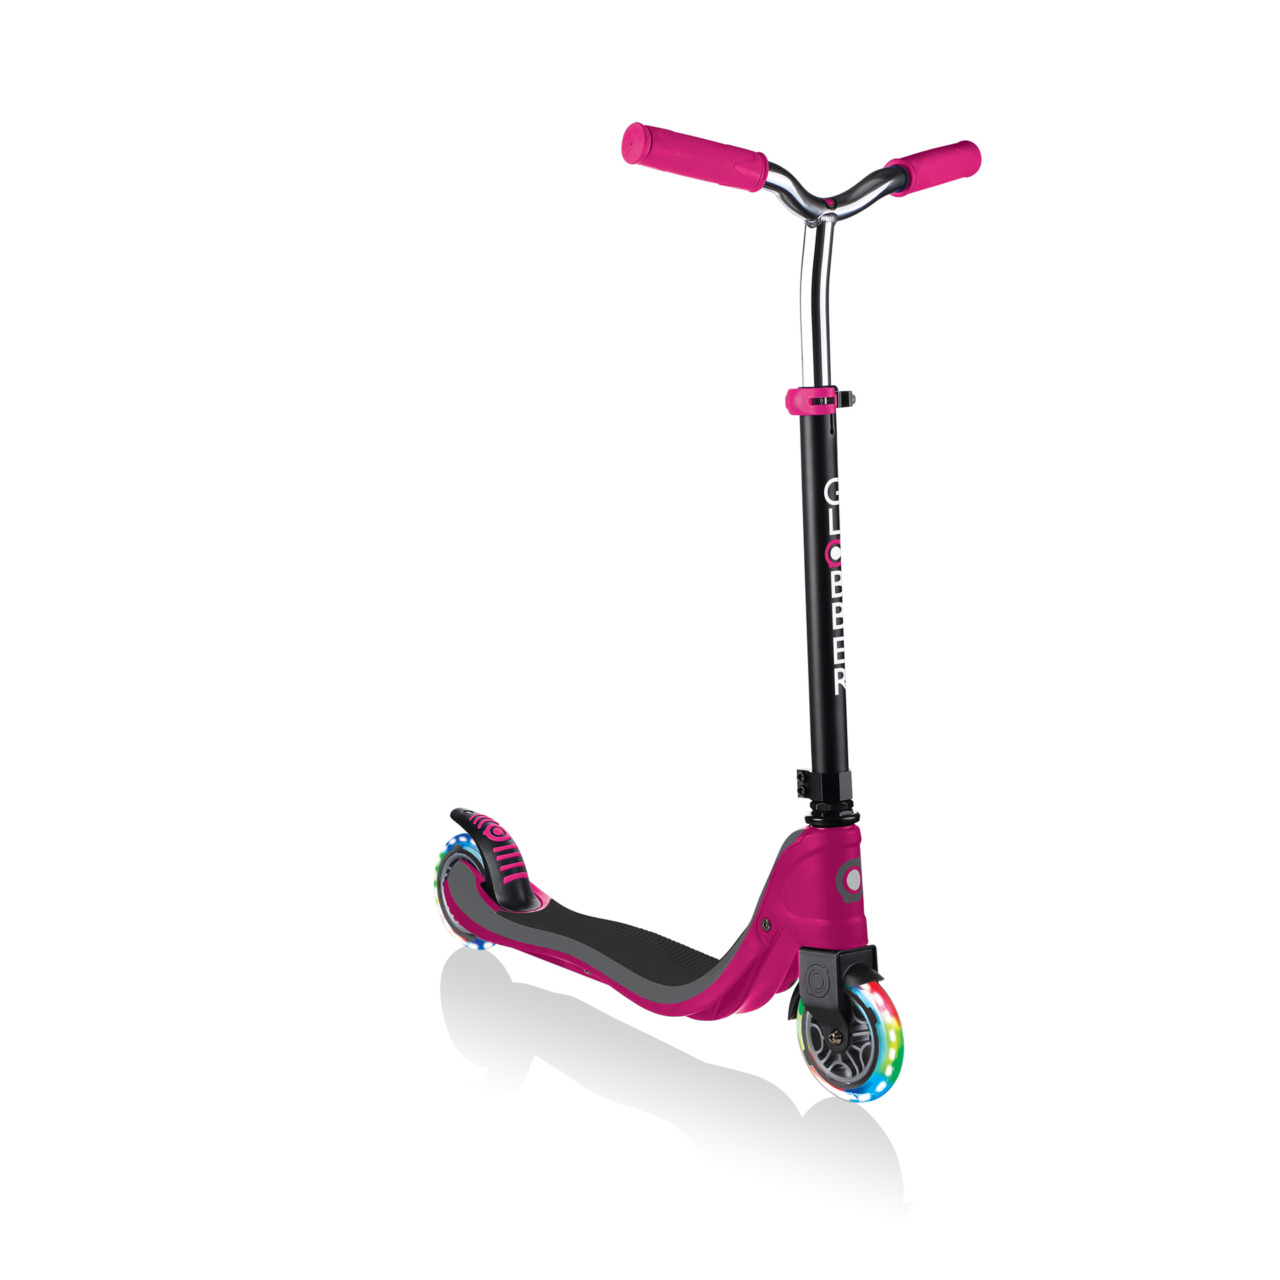 Led Wheel Scooter